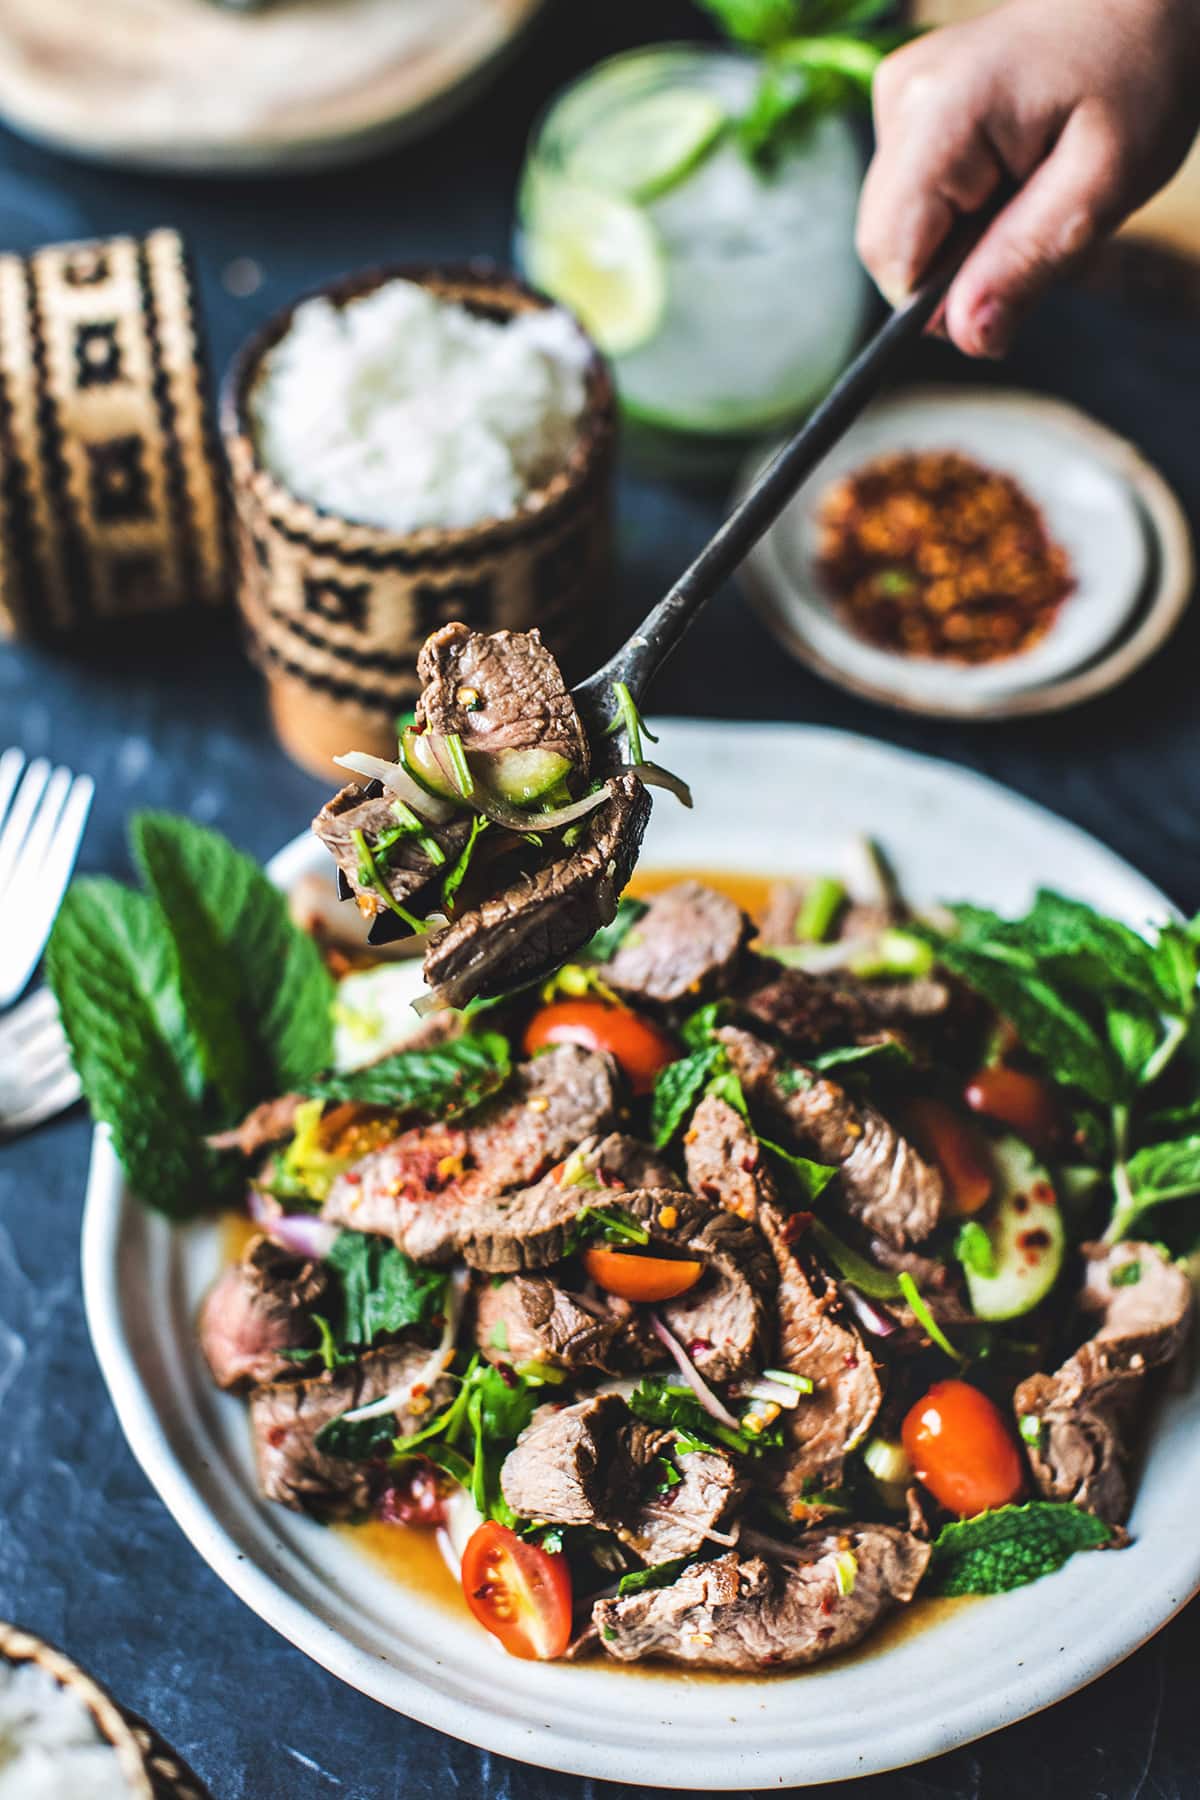 A fork lifting a bite of Thai beef salad.